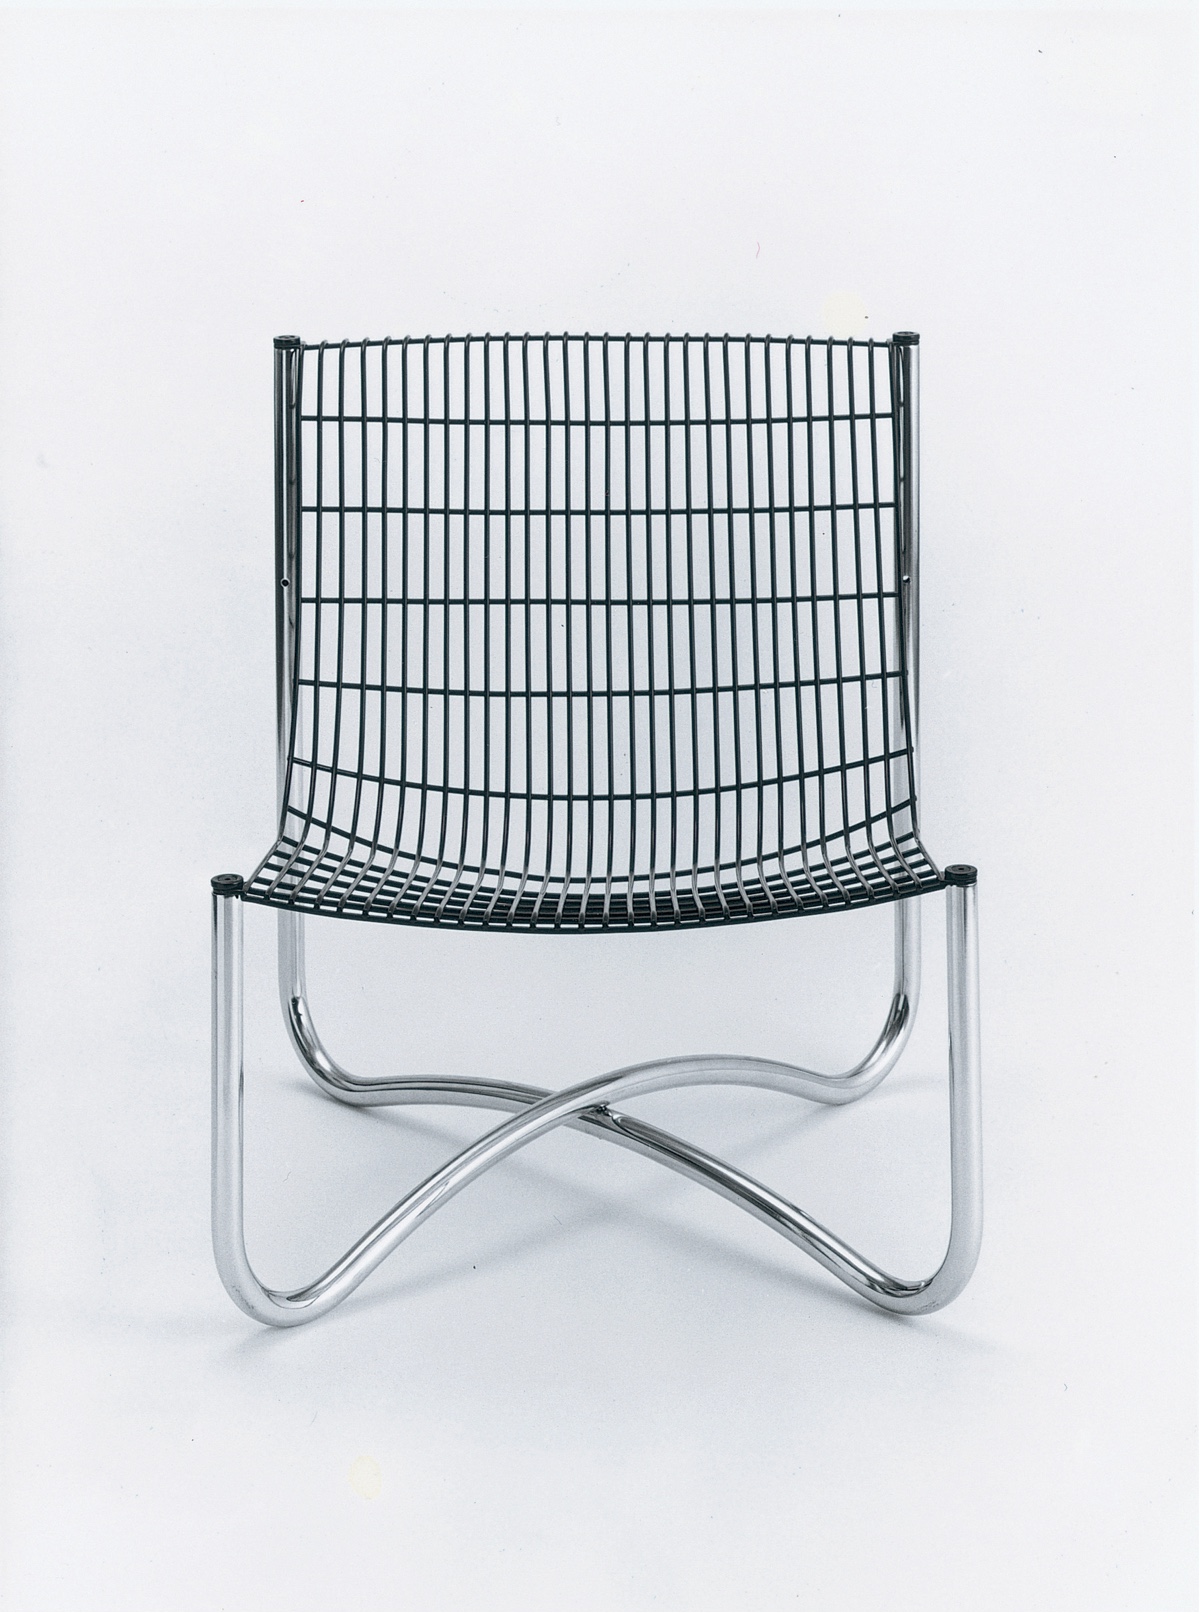 Abacus 700 outdoor chair. Image via Alistair Welch.